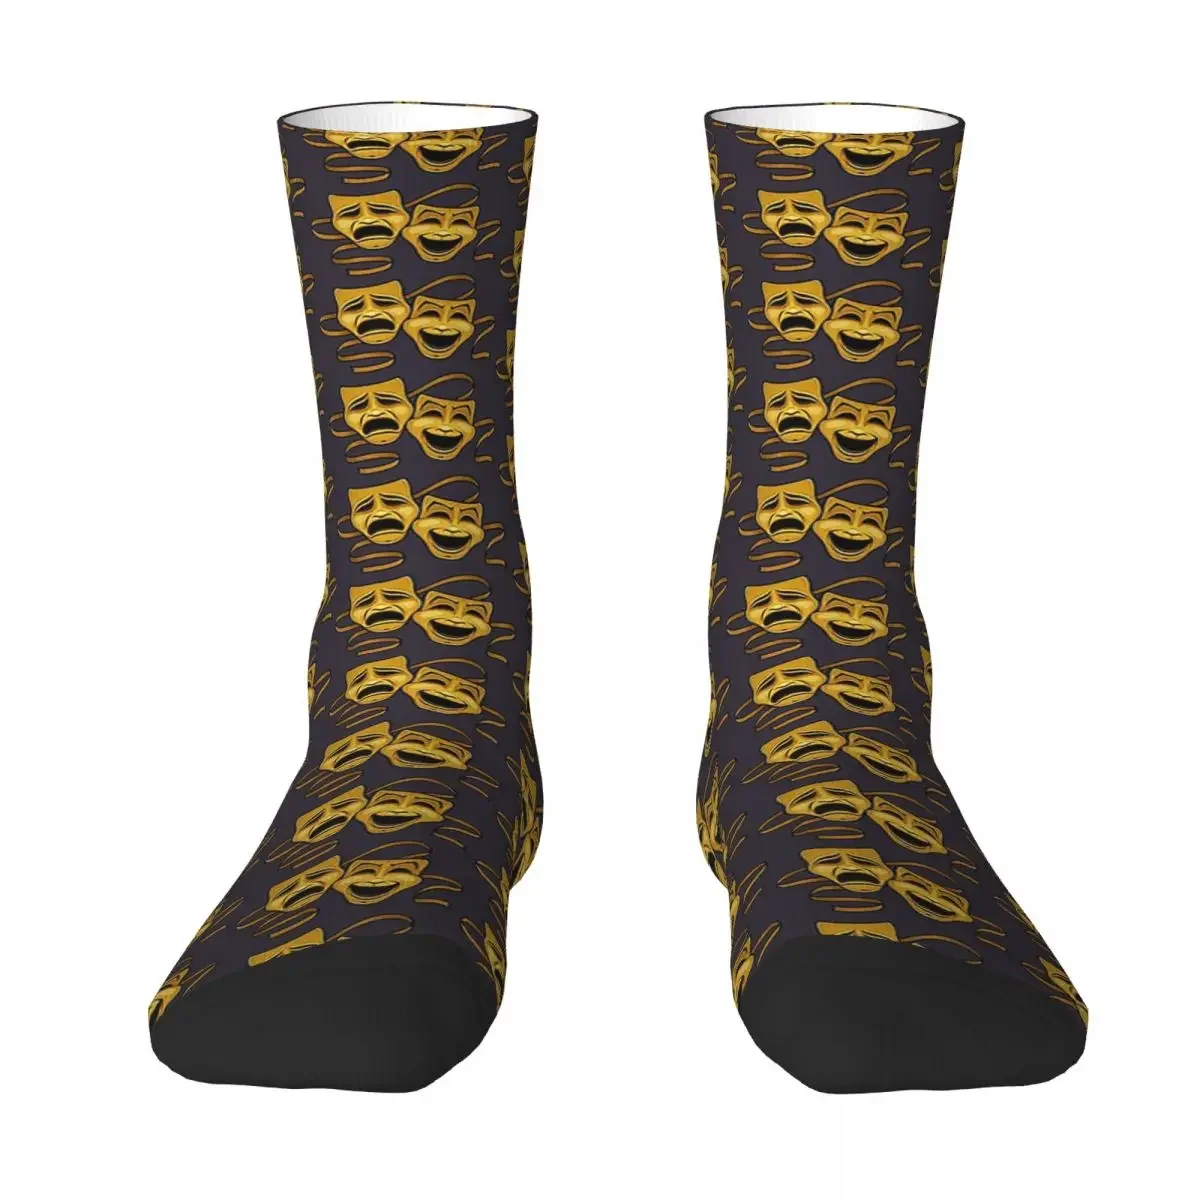 

All Seasons Crew Stockings Gold Comedy And Tragedy Theater Masks Socks Harajuku Funny Long Socks Accessories for Men Women Gifts